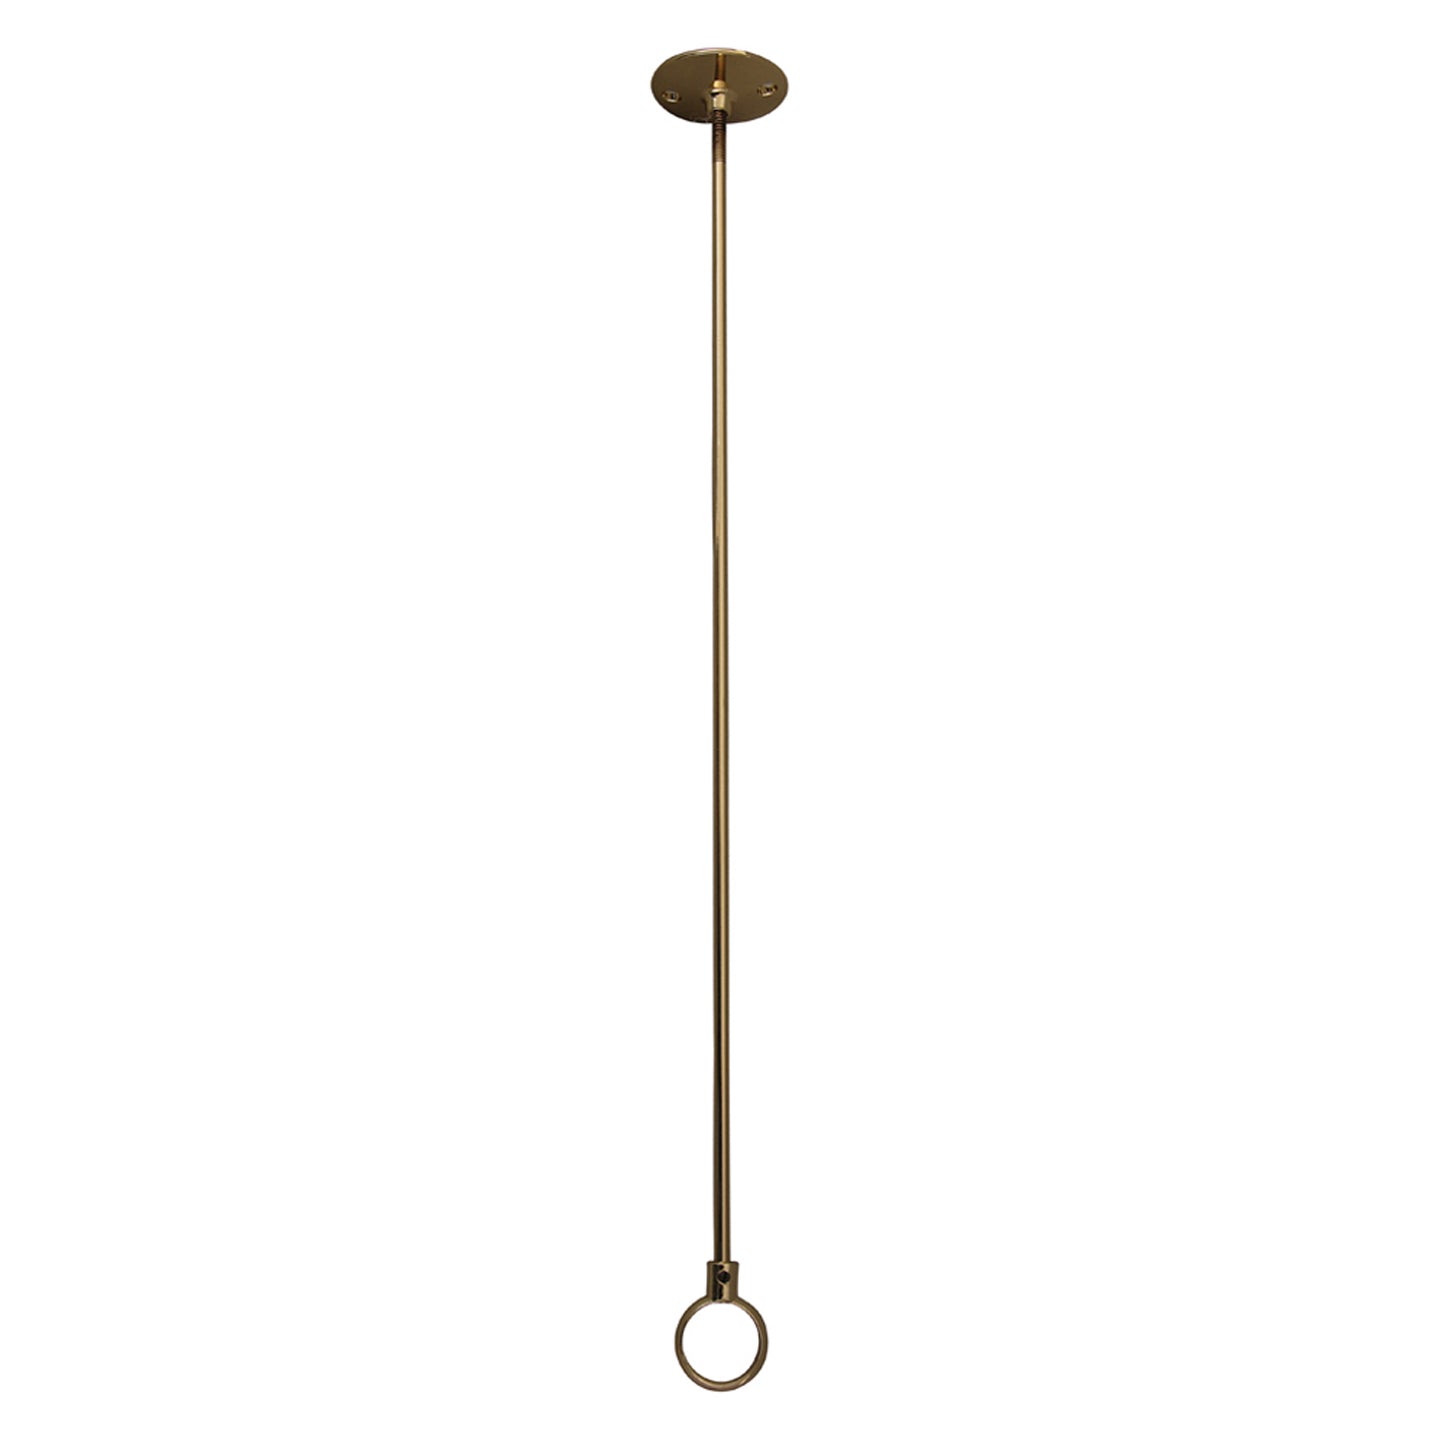 Ceiling Support 42" with Flange and Eyeloop Polished Brass